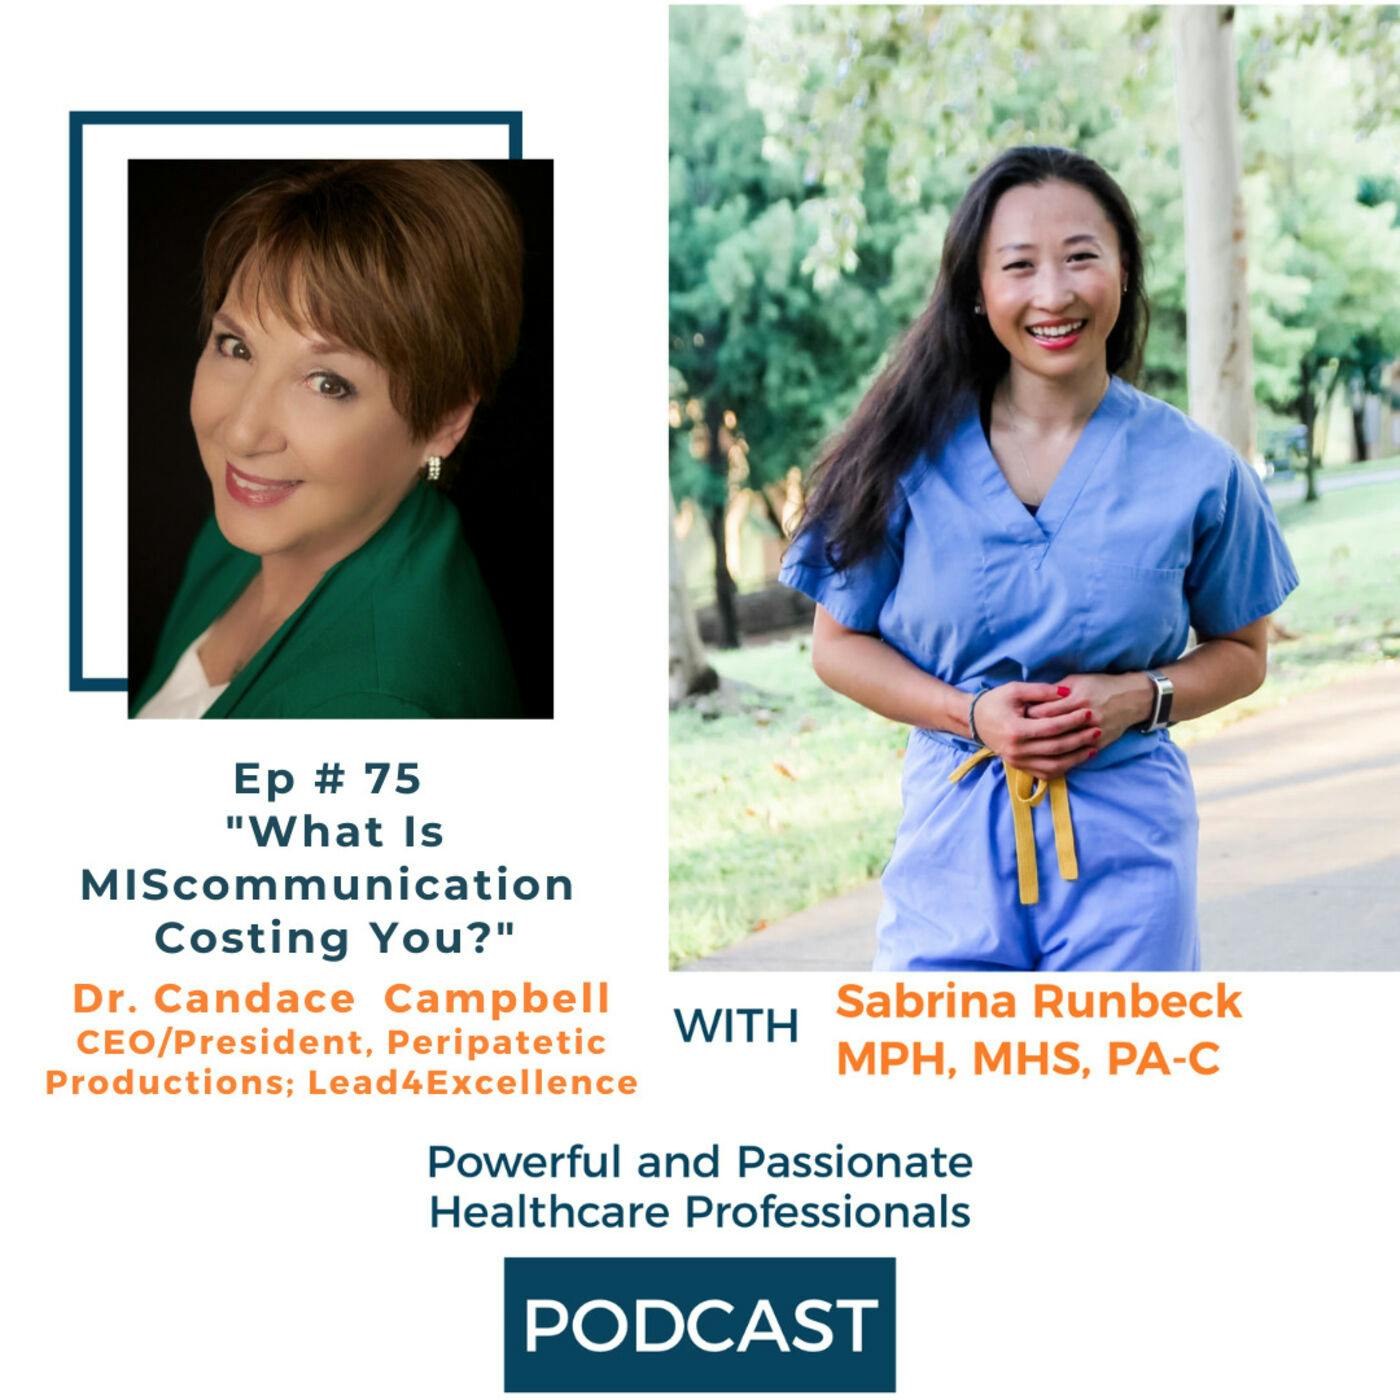 Ep 75 – What Is MIScommunication Costing You? with Dr. Candace Campbell